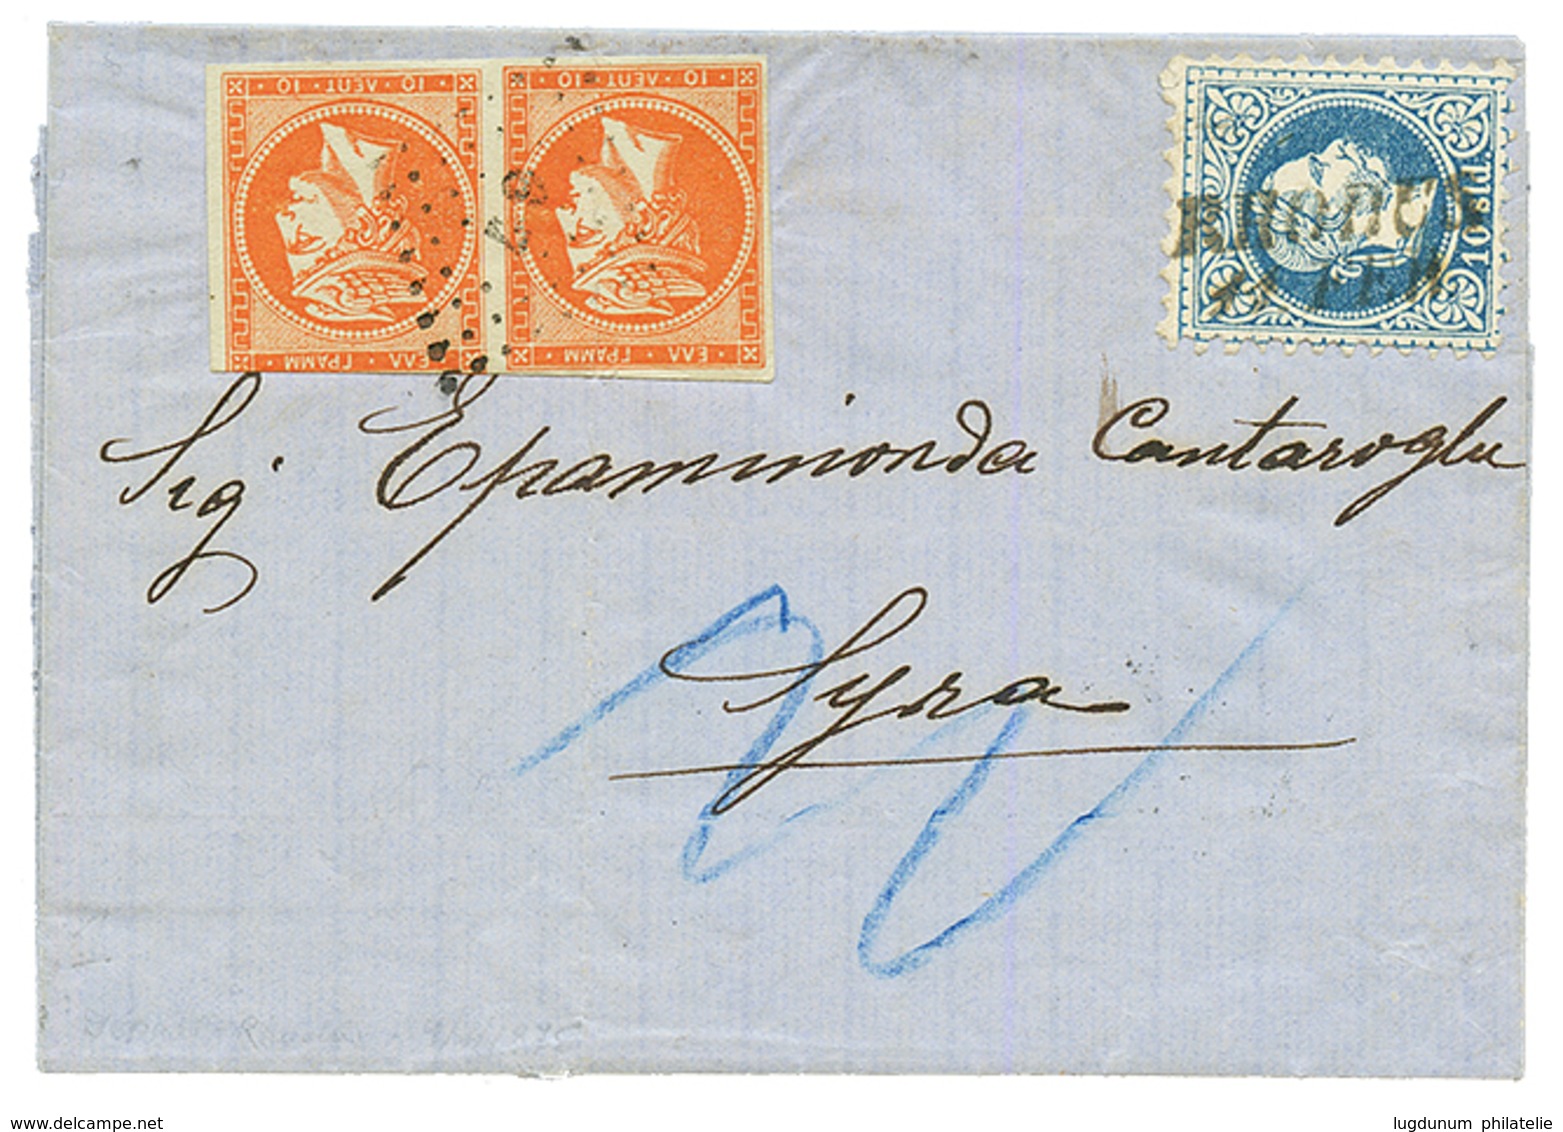 GREECE : 1875 10 SOLDI Canc. RHODUS + GRECE Pair 10l (1 Stamp Cut) Canc. 67 On Entire Letter To SYRA. MIXT Franking From - Oriente Austriaco